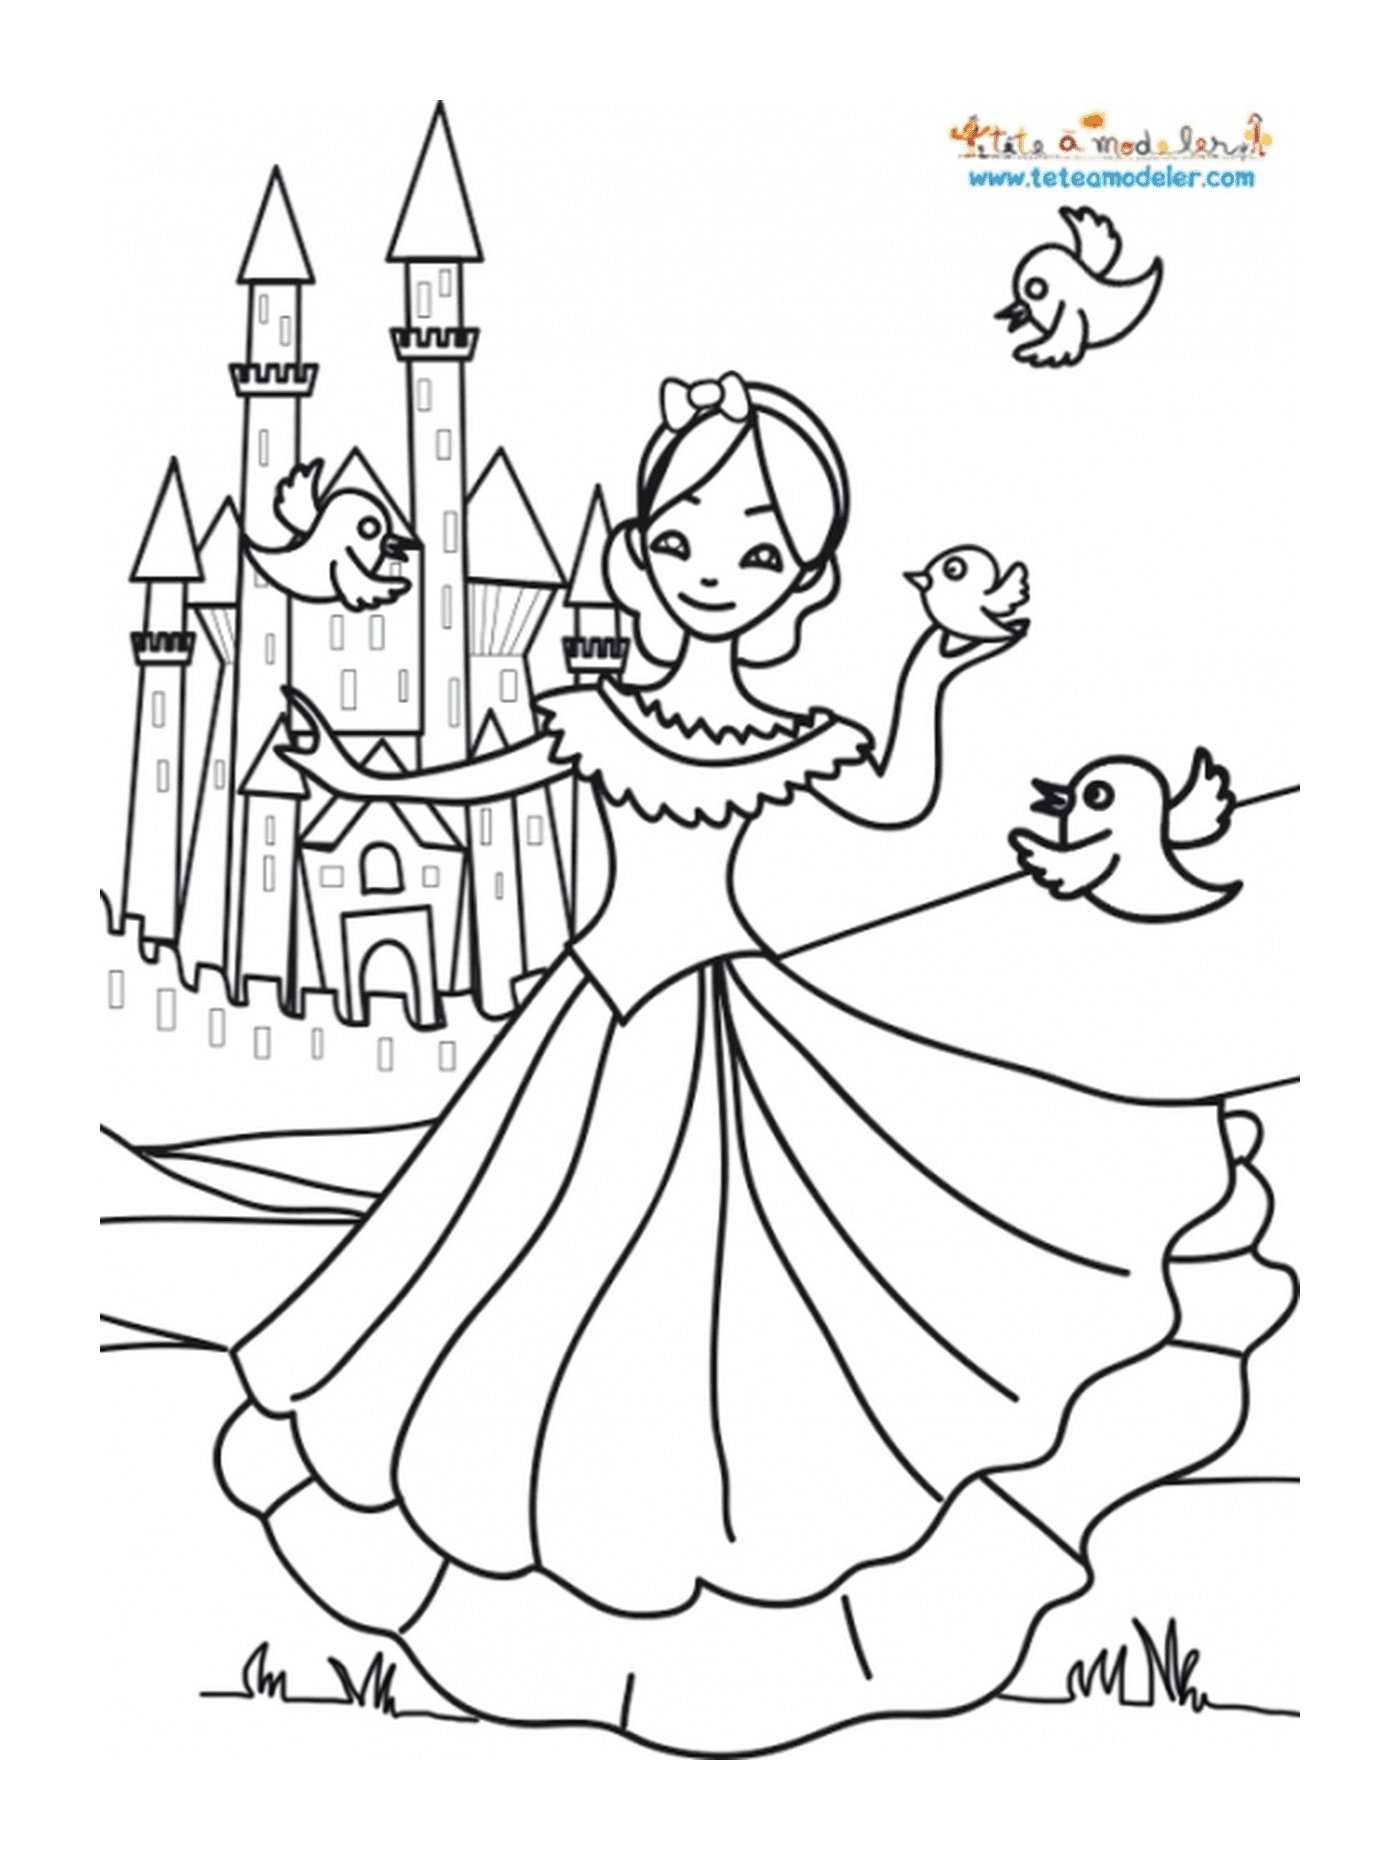  A girl in front of a castle, like a princess 